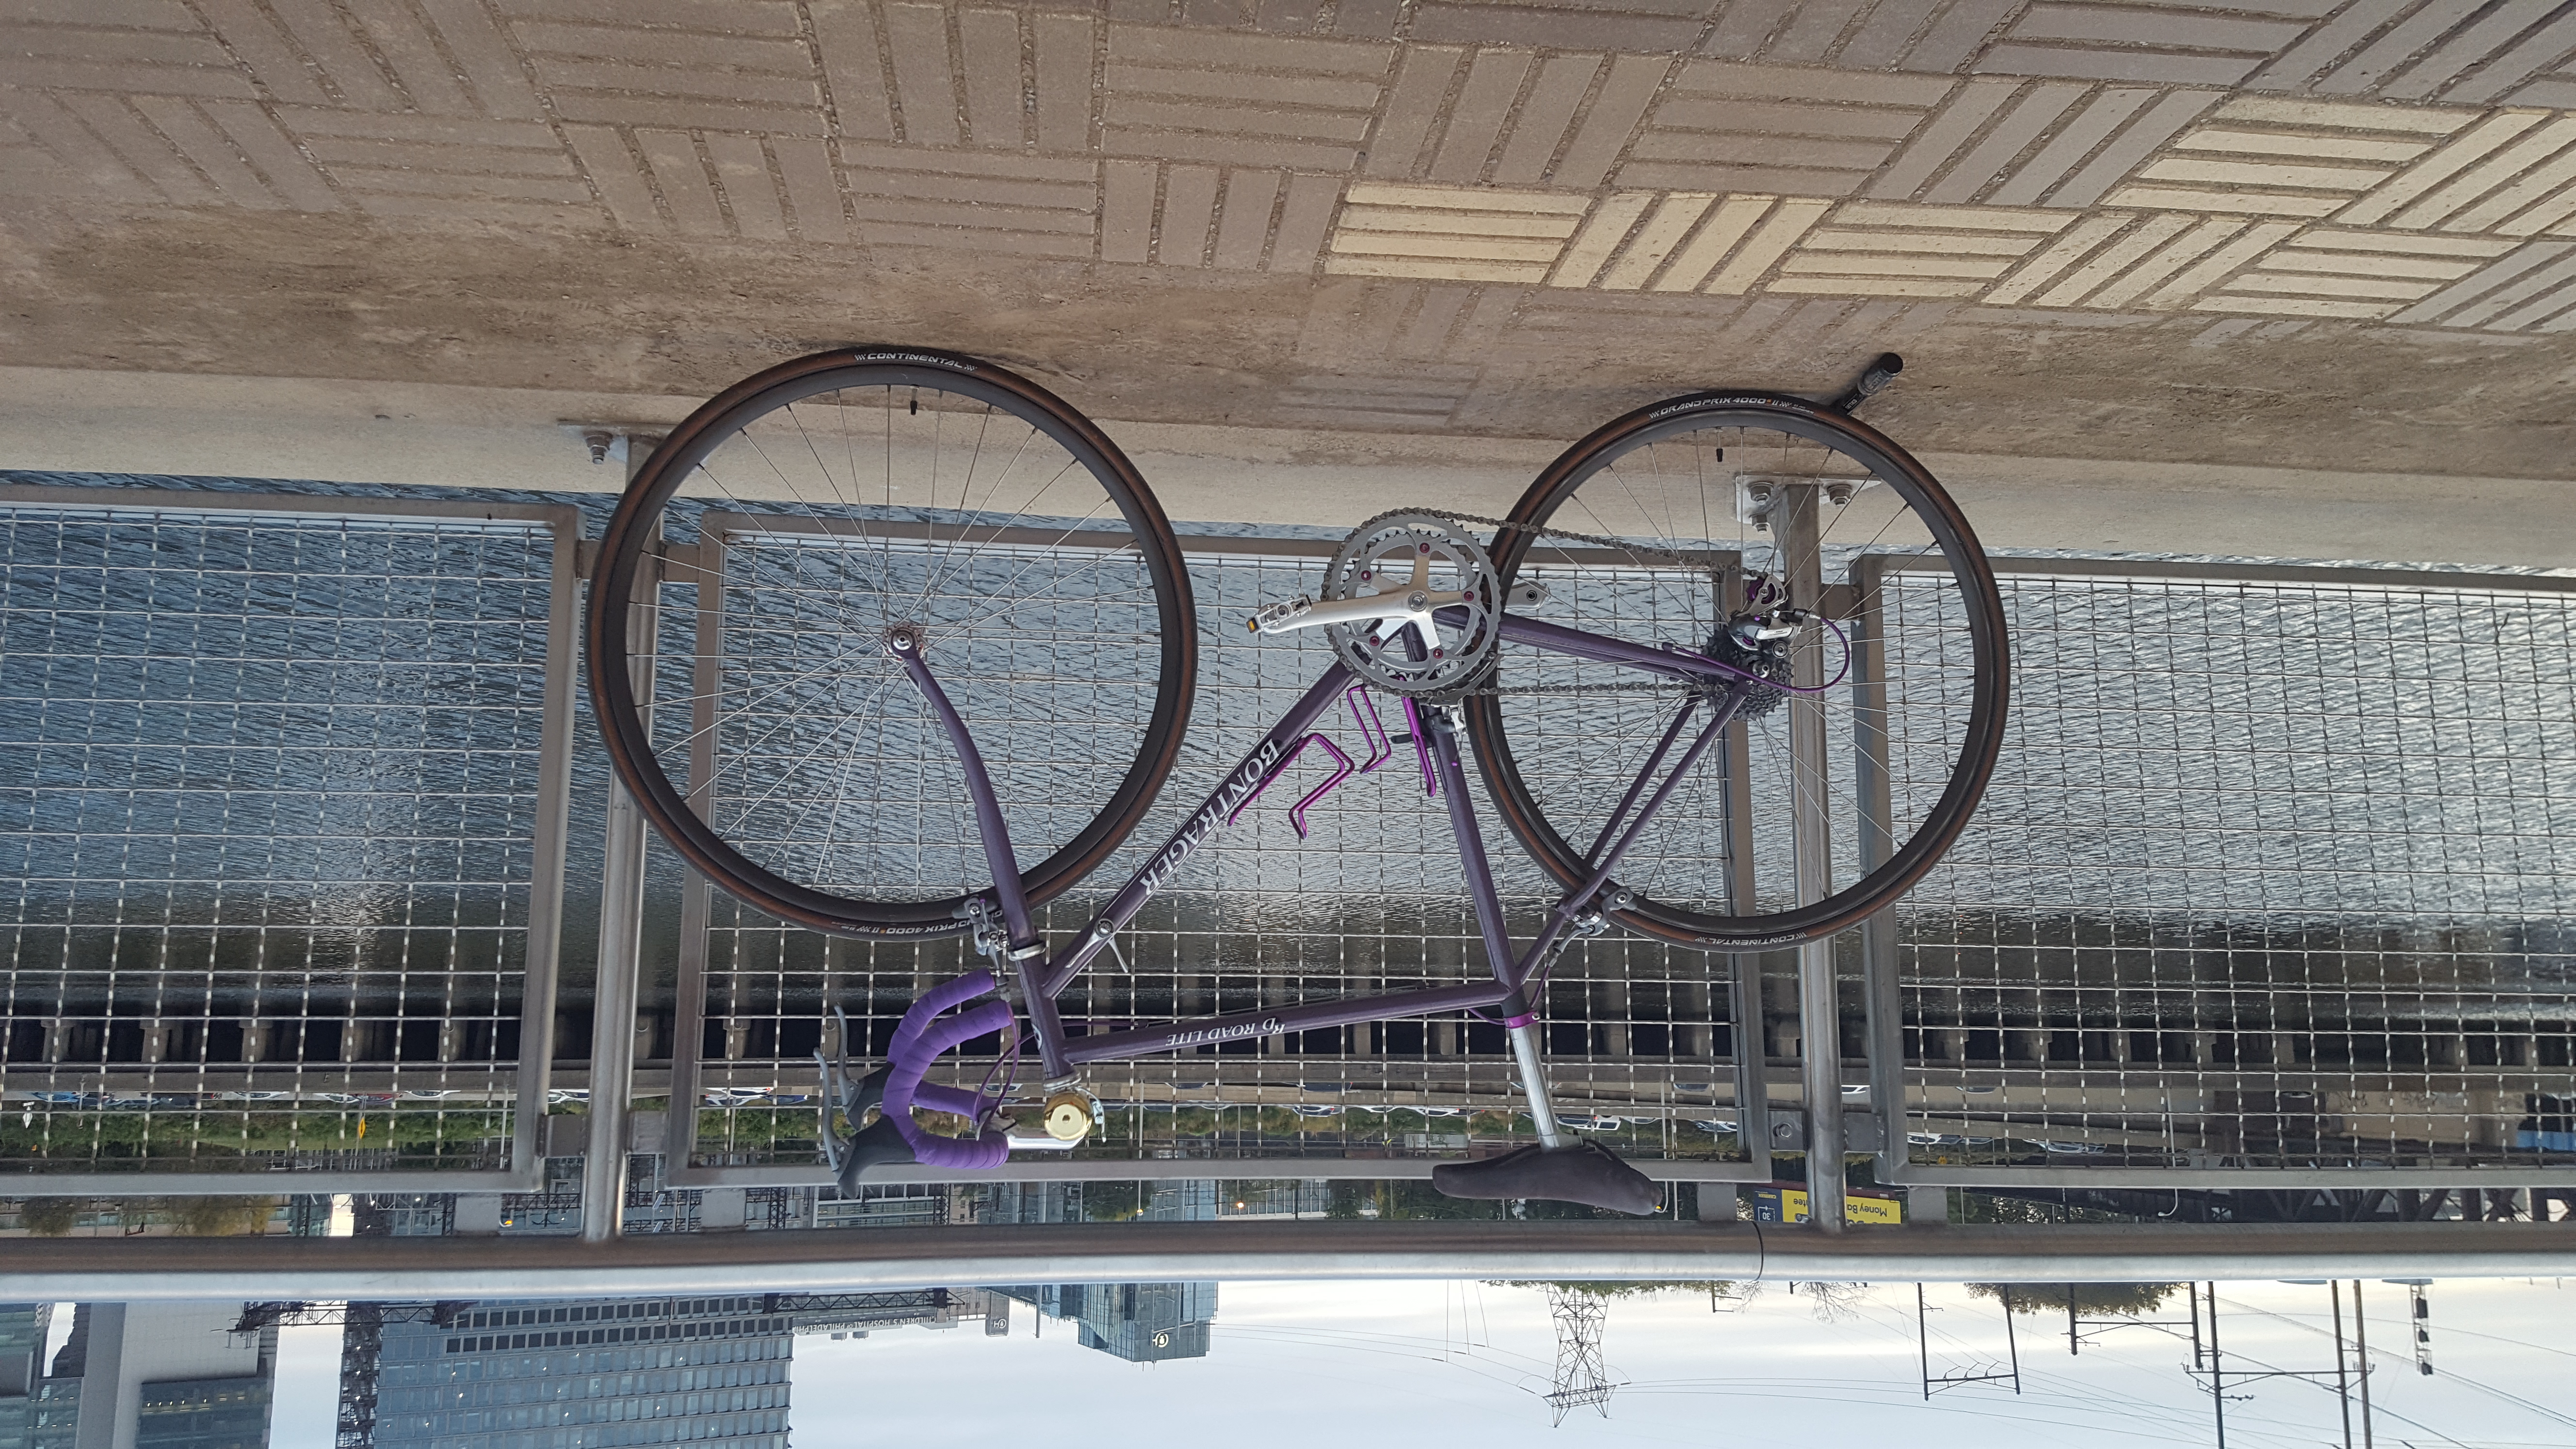 A matte-purple bicycle with sparkley clear-coat posed on a fence in front of a river. It has drop-bars with purple tape, moderately aero wheels with tan-wall tires, and a large brass bell affixed to the stem.